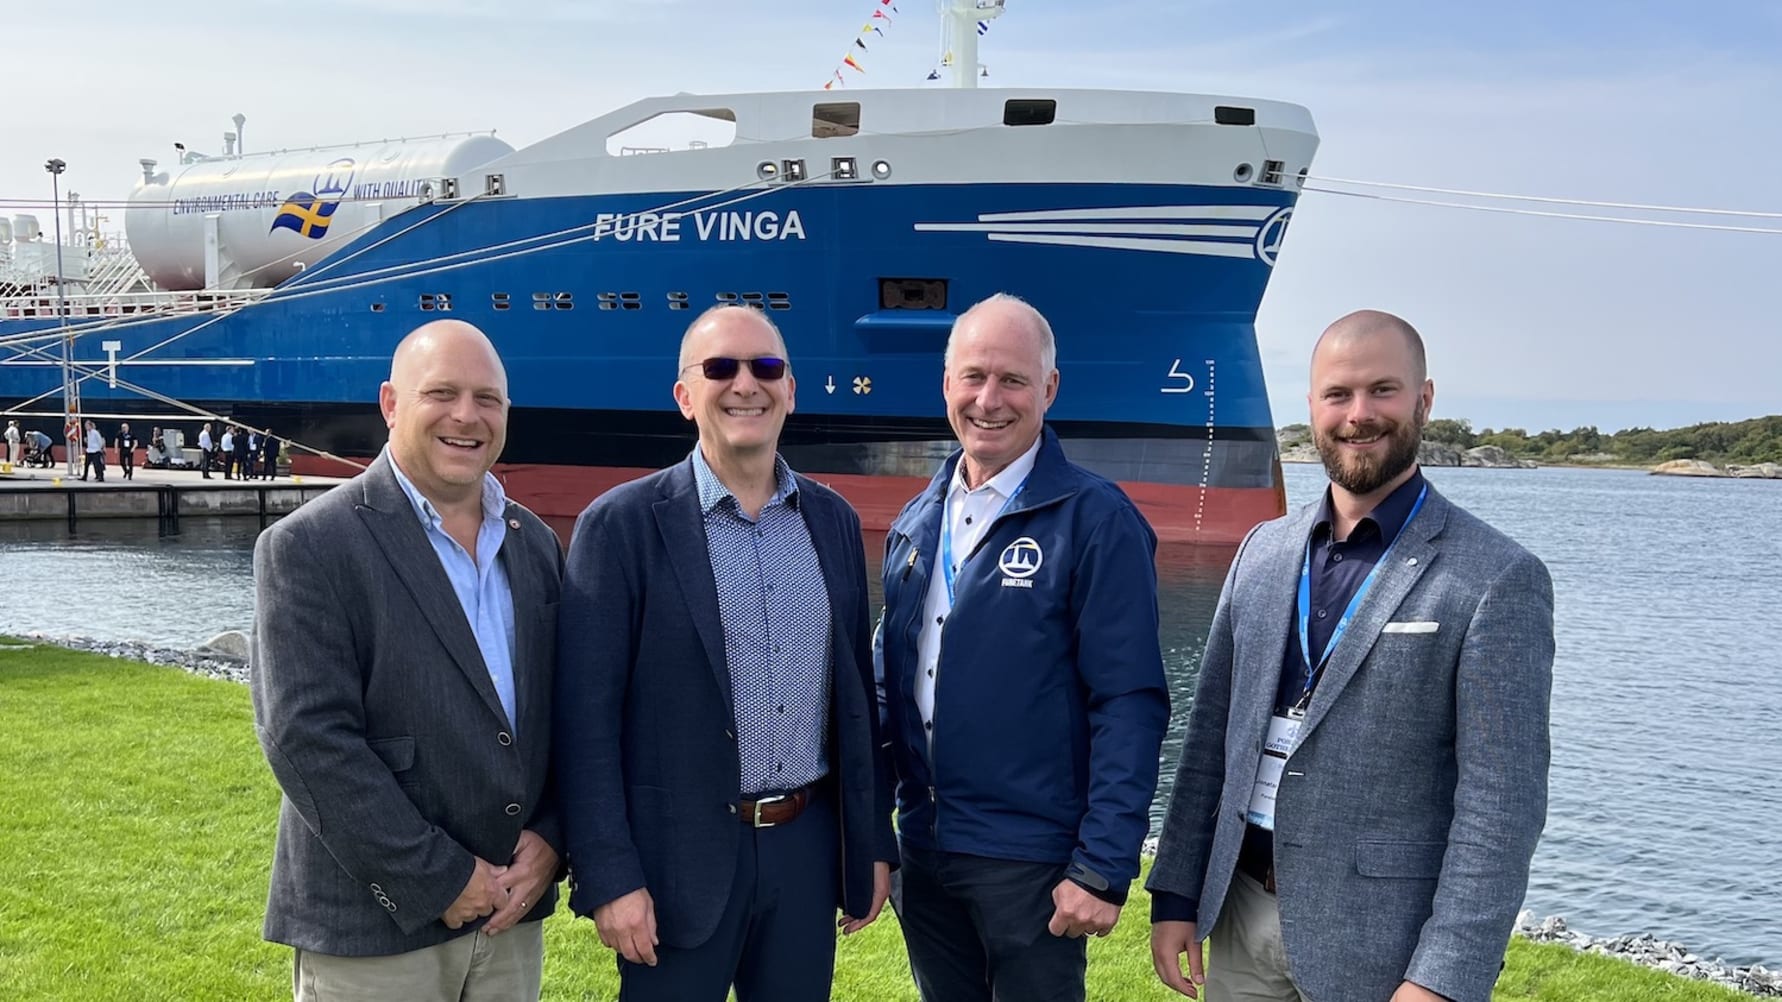 FureBear signs for two more tankers